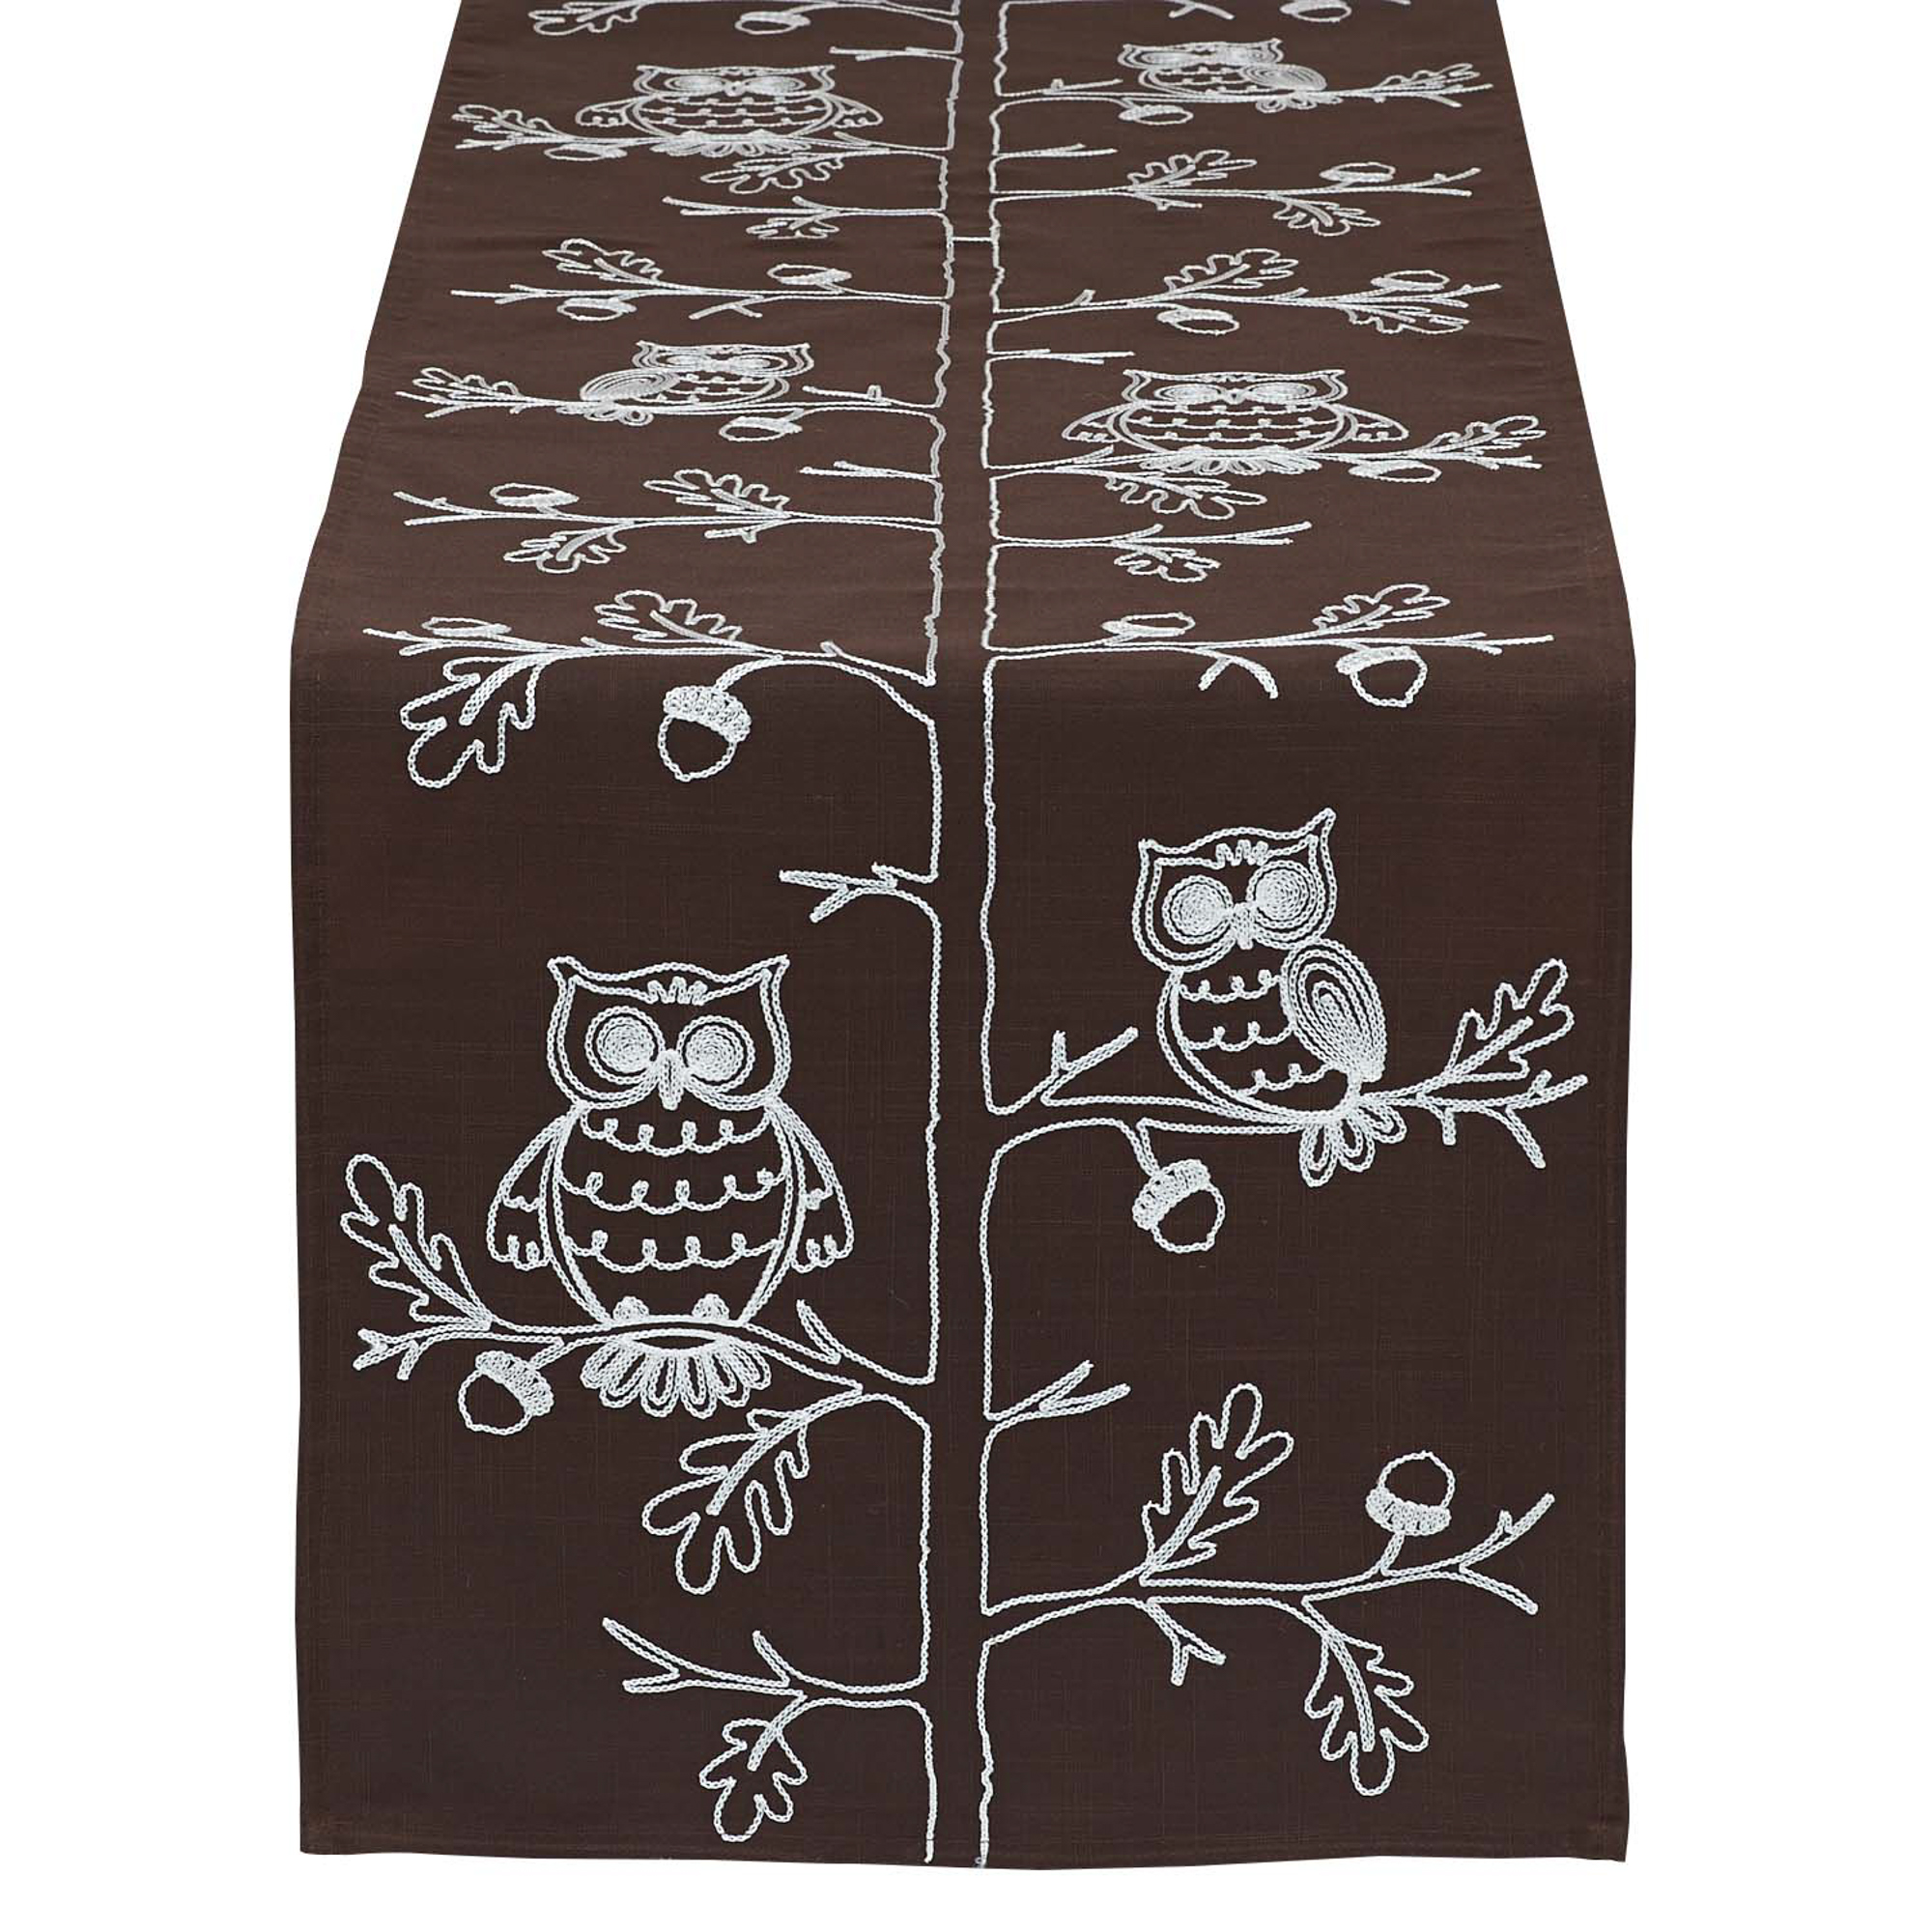 Contemporary Home Living 70" Brown and White Embroidered Owls Rectangular Table Runner